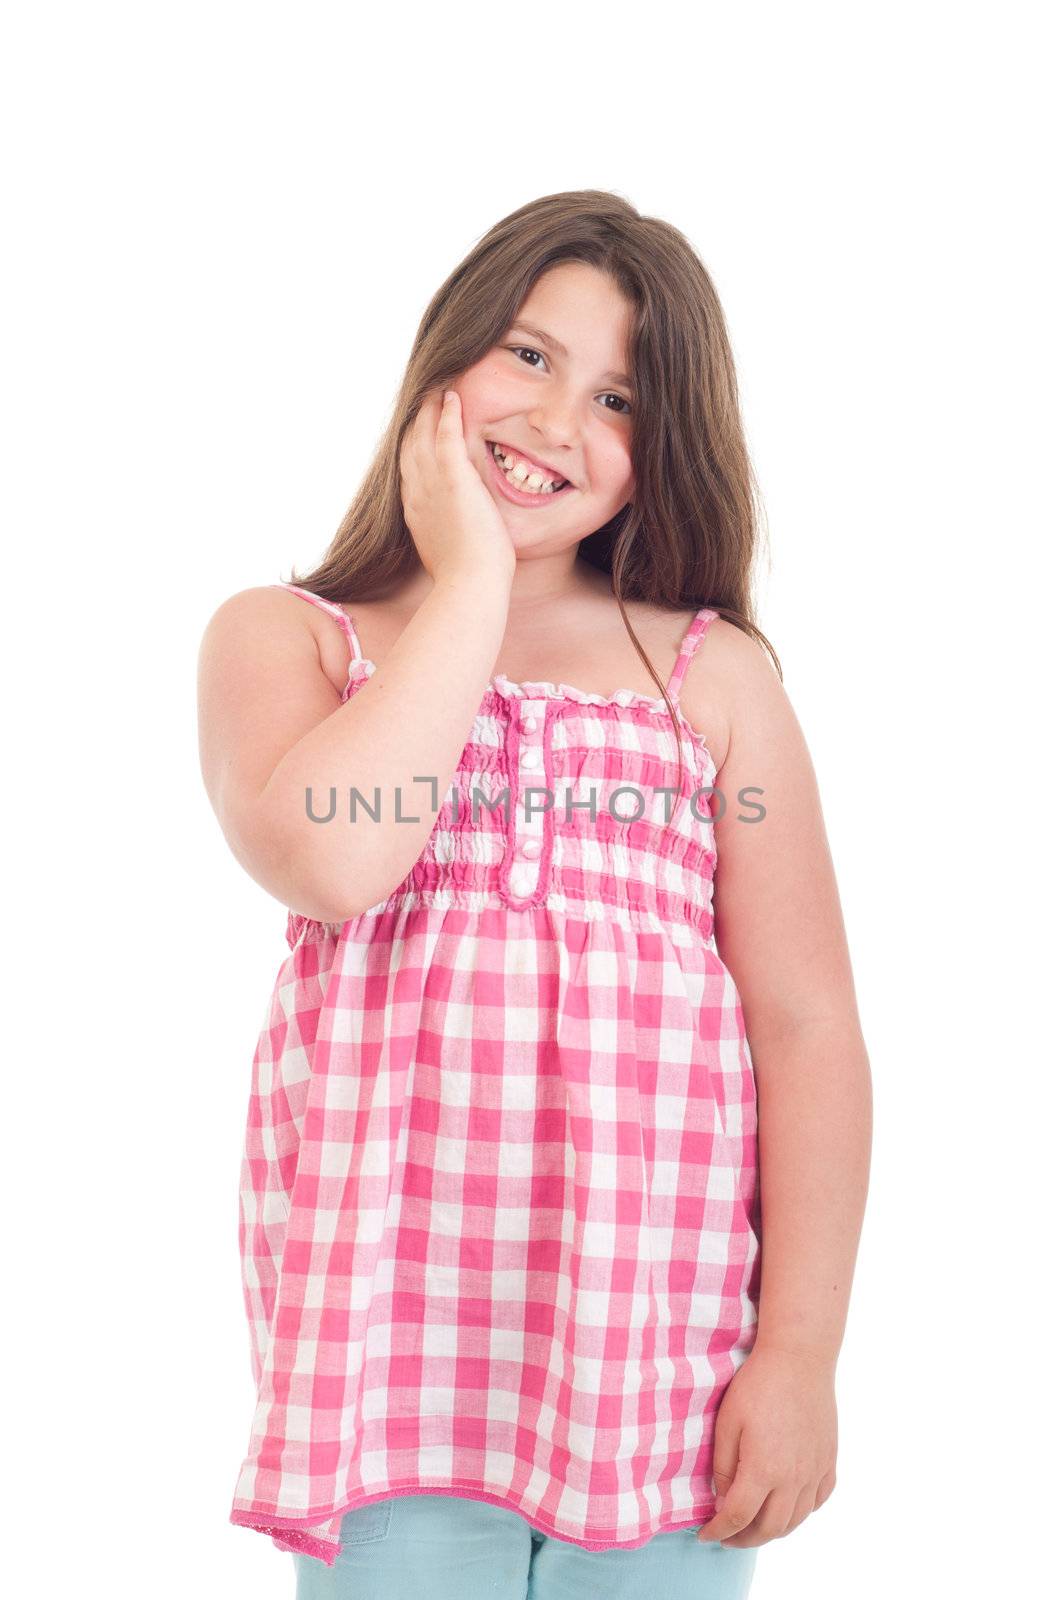 adorable little girl portrait smiling in a pink top (isolated on white background) 